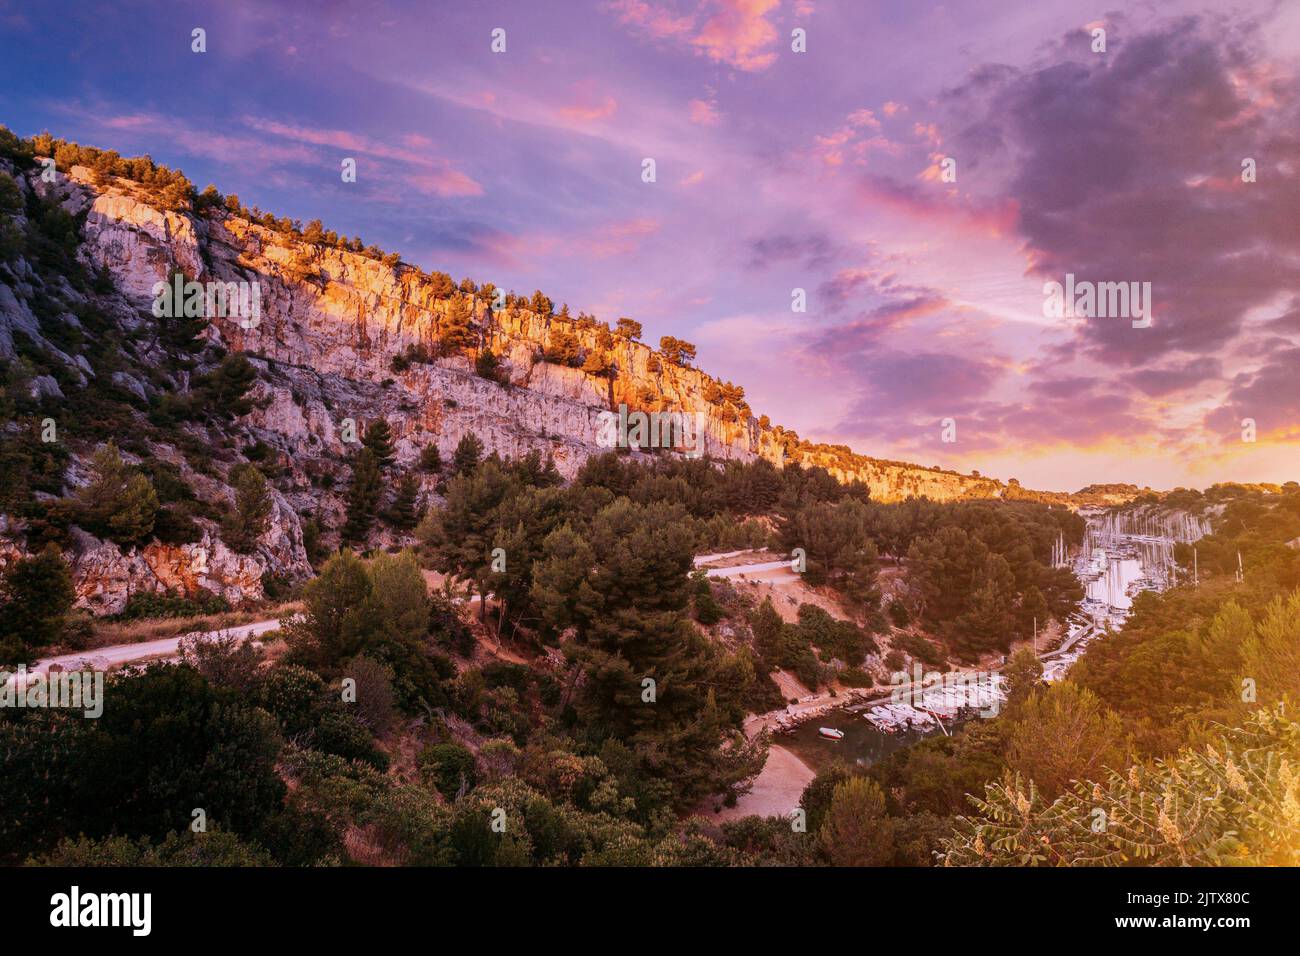 Cassis, Calanques, France. French Riviera. Beautiful Nature Of Cote De Azur On The Azure Coast Of France. Calanques - A Deep Bay Surrounded By High Stock Photo